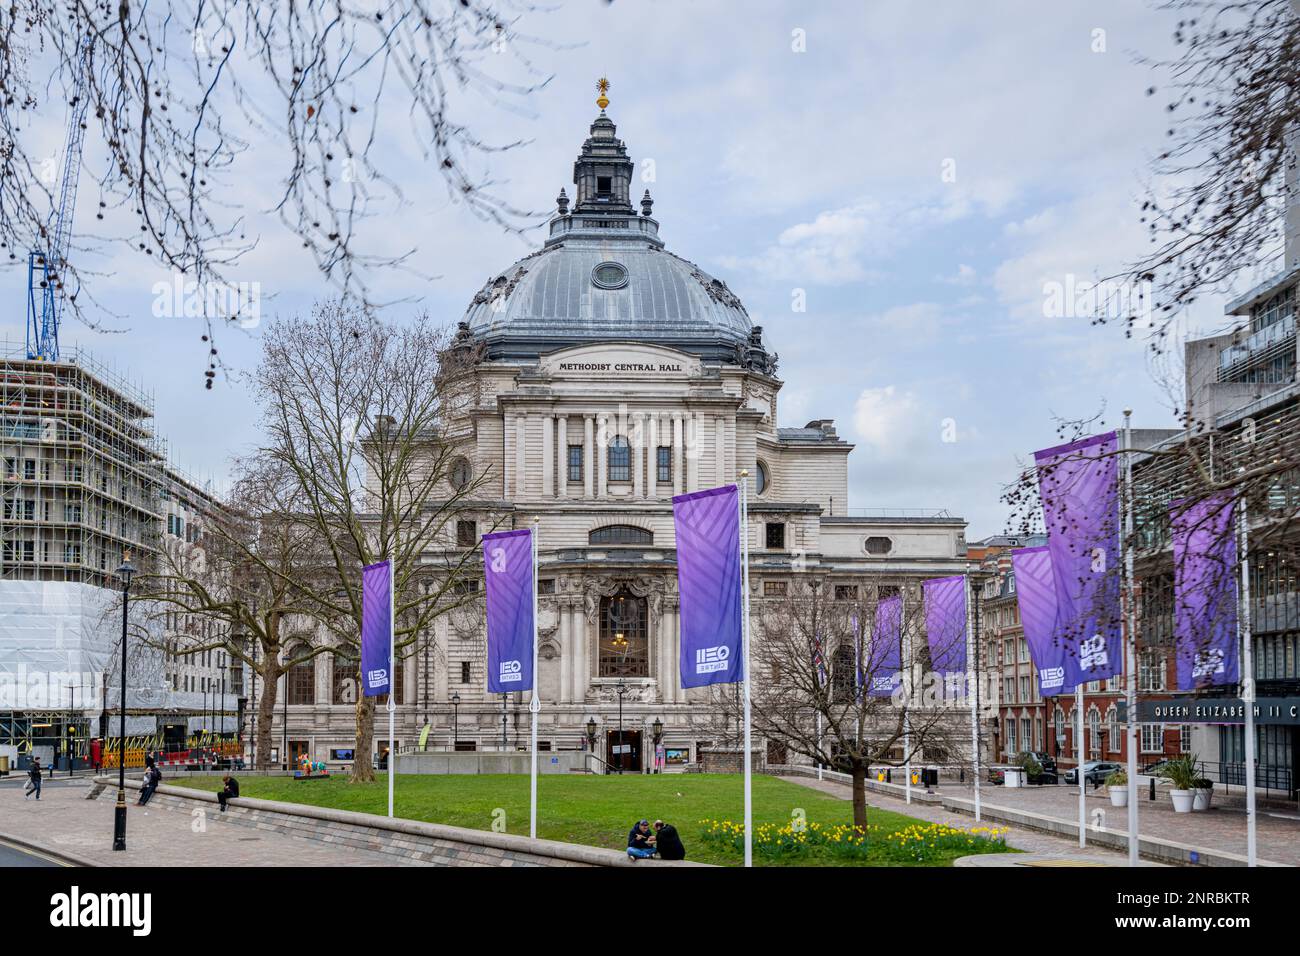 London, UK - February 12, 2023: Methodist central hall on Westminster Square, London, UK. Middlesex Guildhall Stock Photo